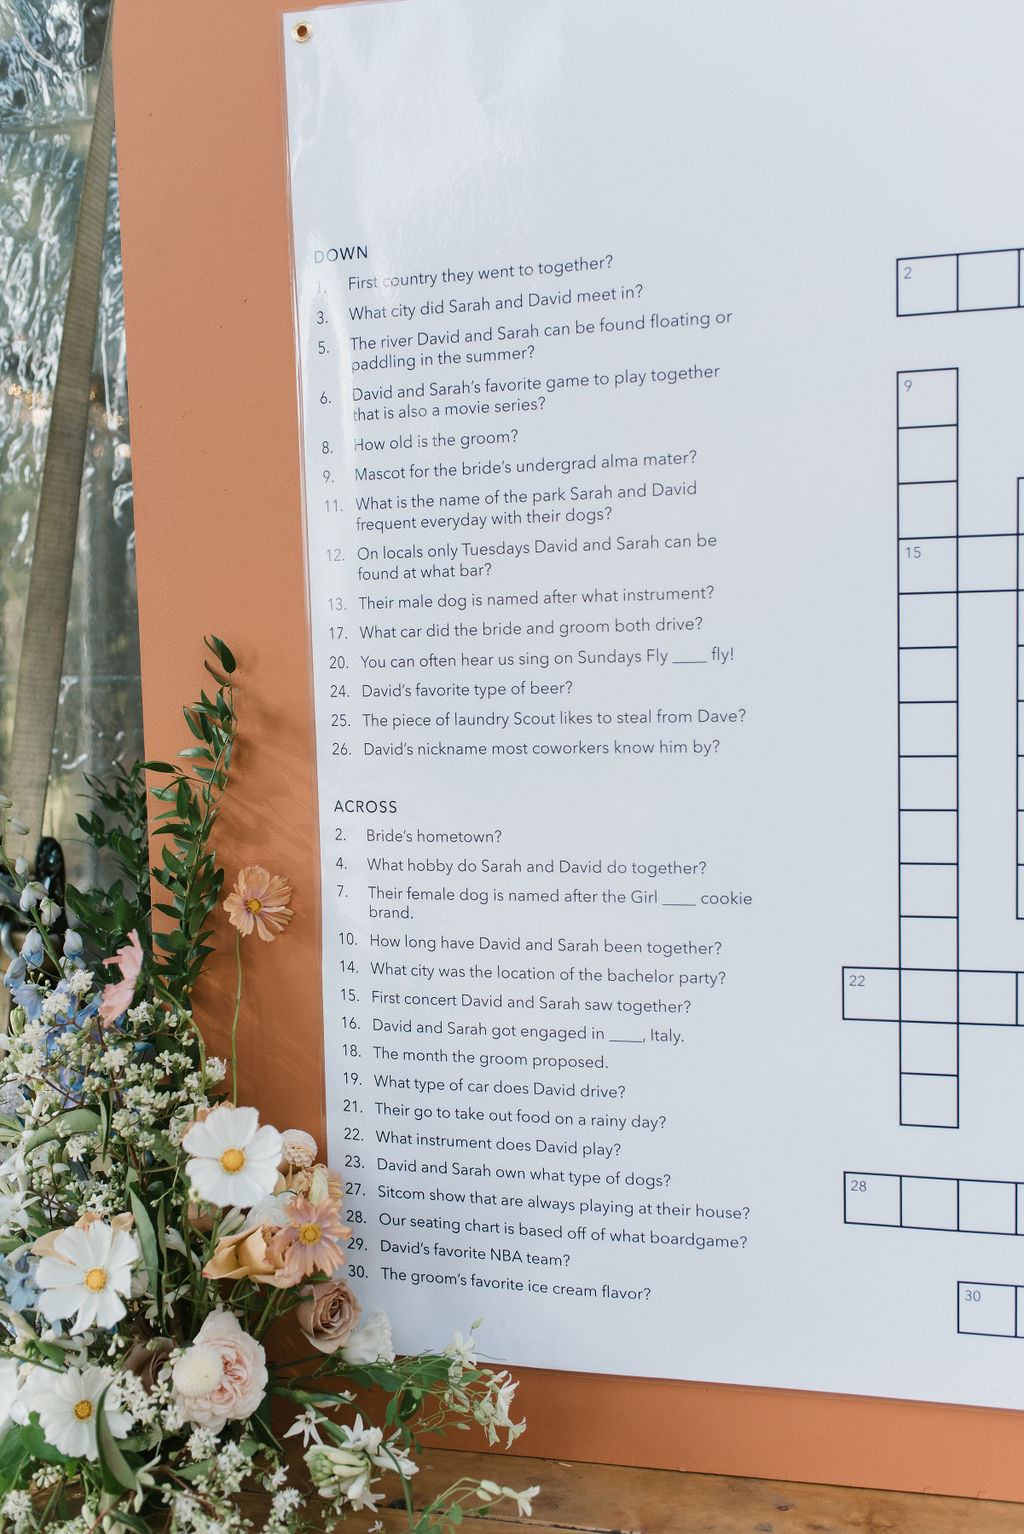 scrabble questions about the bride and groom, a personalized wedding detail 